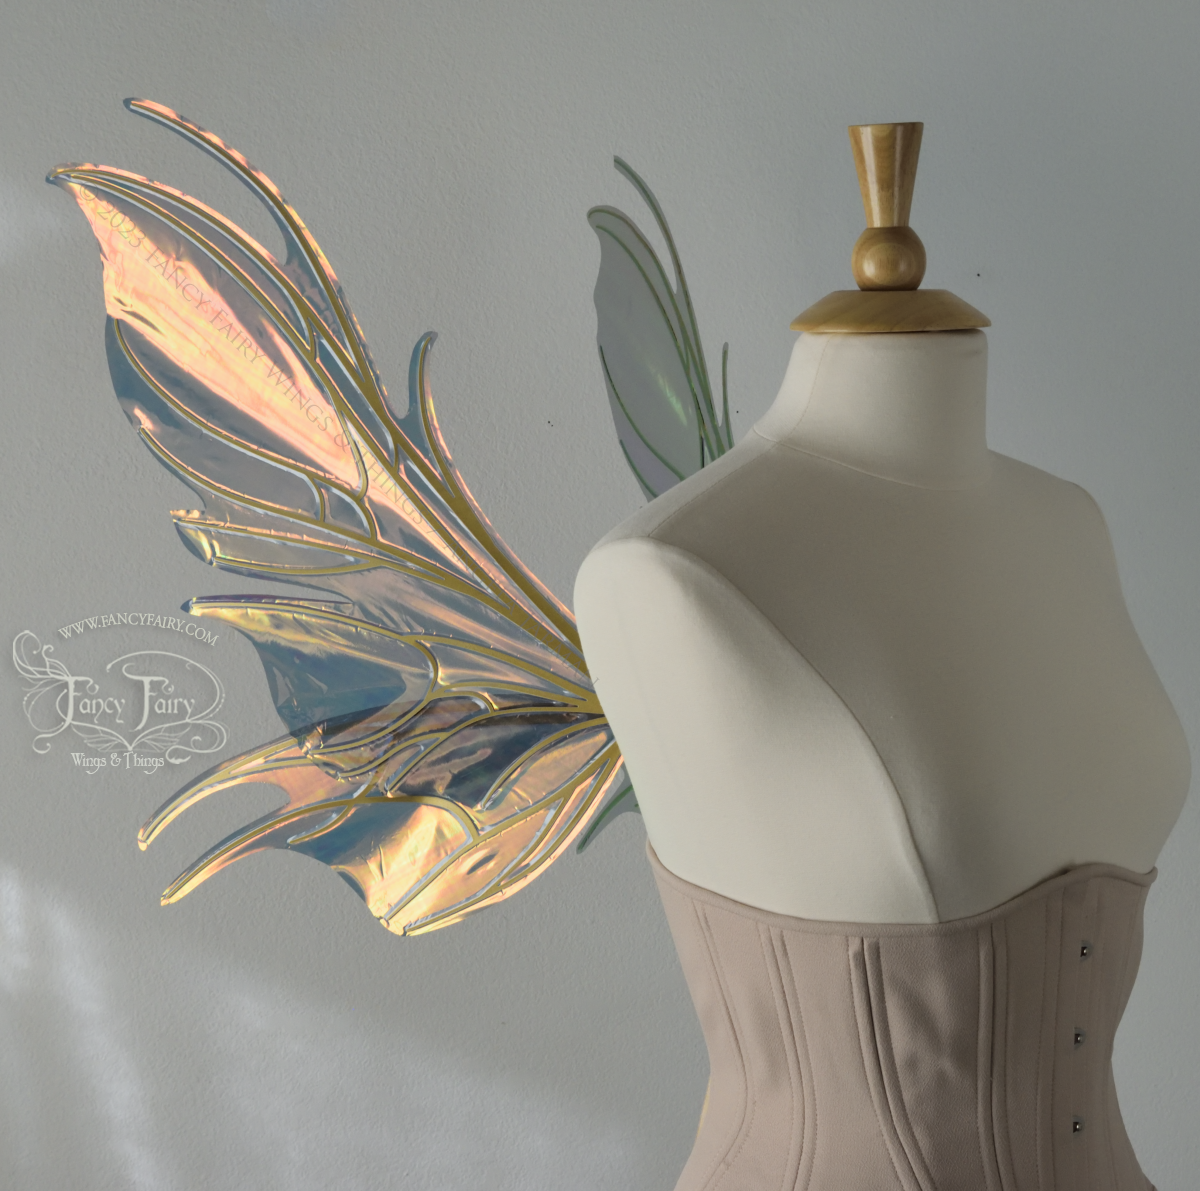 Left side view of iridescent orange & dark grey/blue fairy wings with spikey veins, worn by a dress form